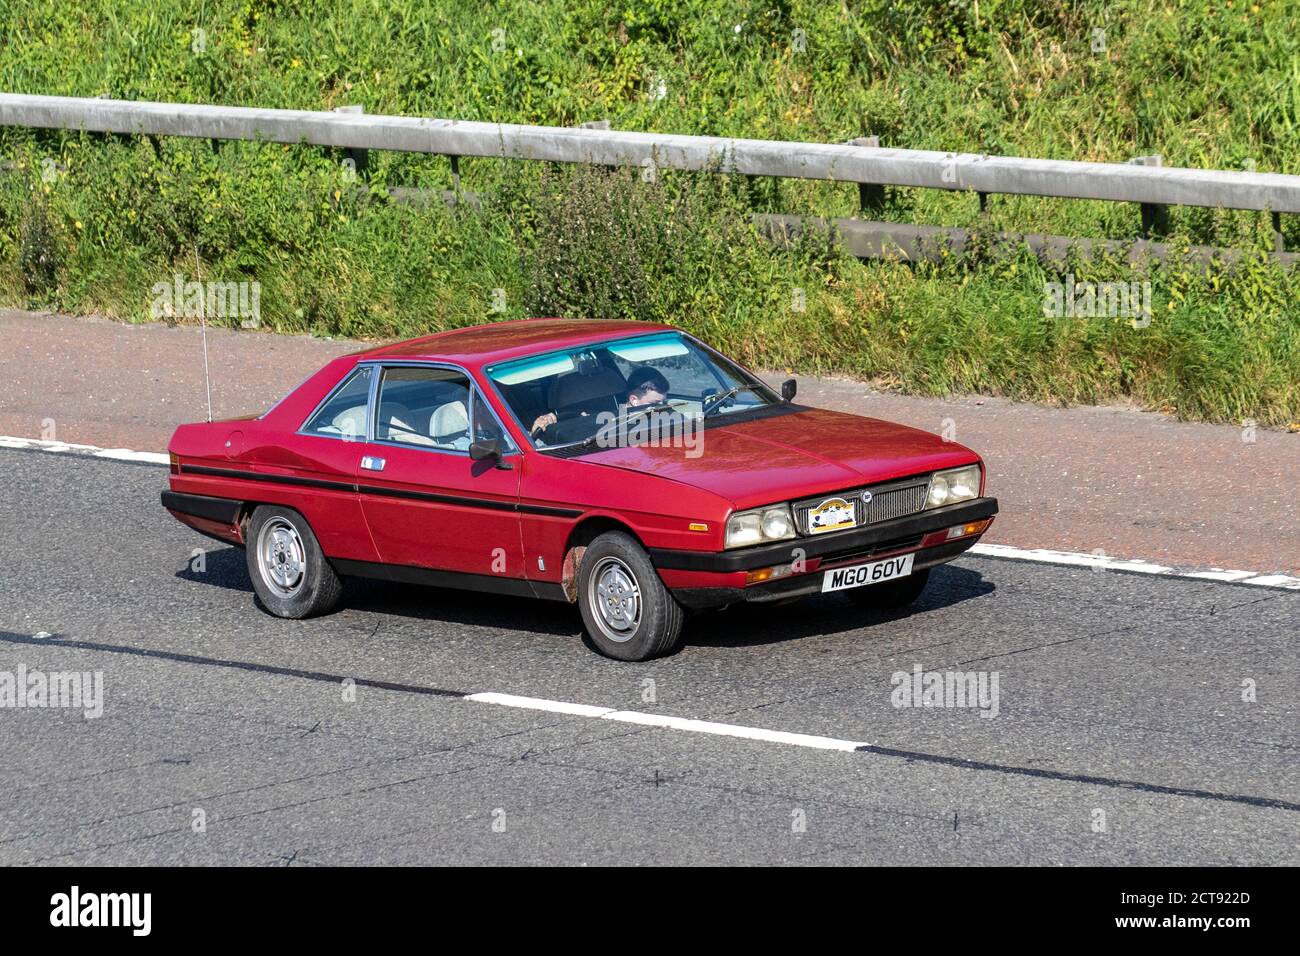 1979 70s red Lancia Gamma; Vehicular traffic moving vehicles, cars driving vehicle on UK roads, motors, motoring on the M6 motorway highway network. Stock Photo